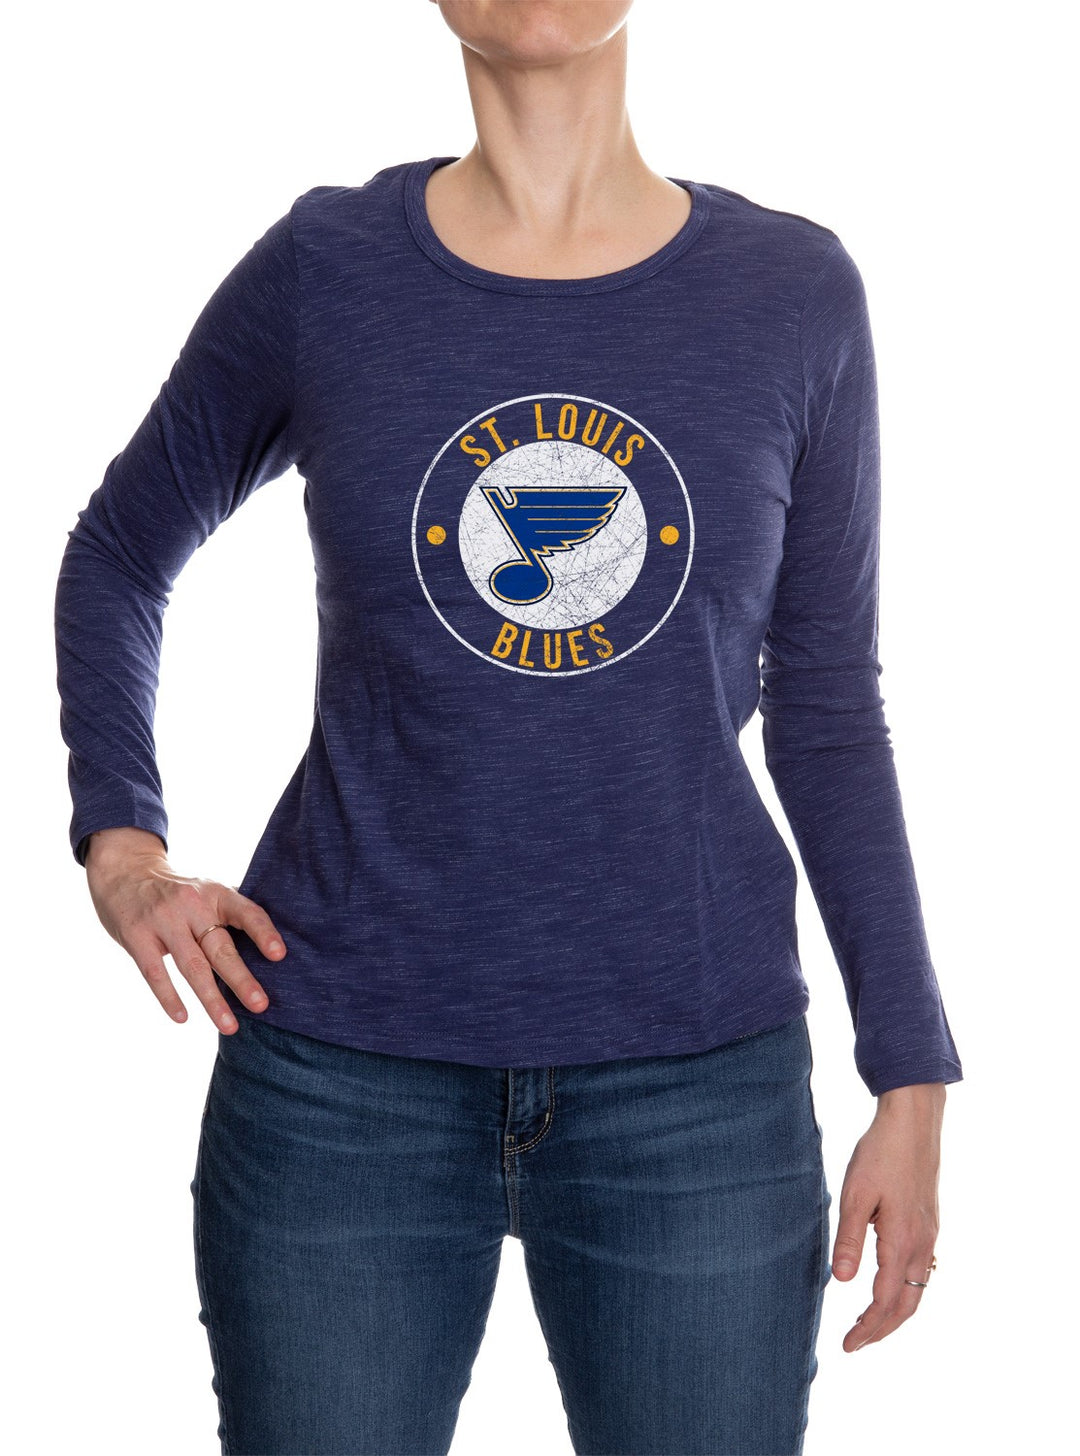 St. Louis Blues Long Sleeve Shirt for Women in Blue Front View